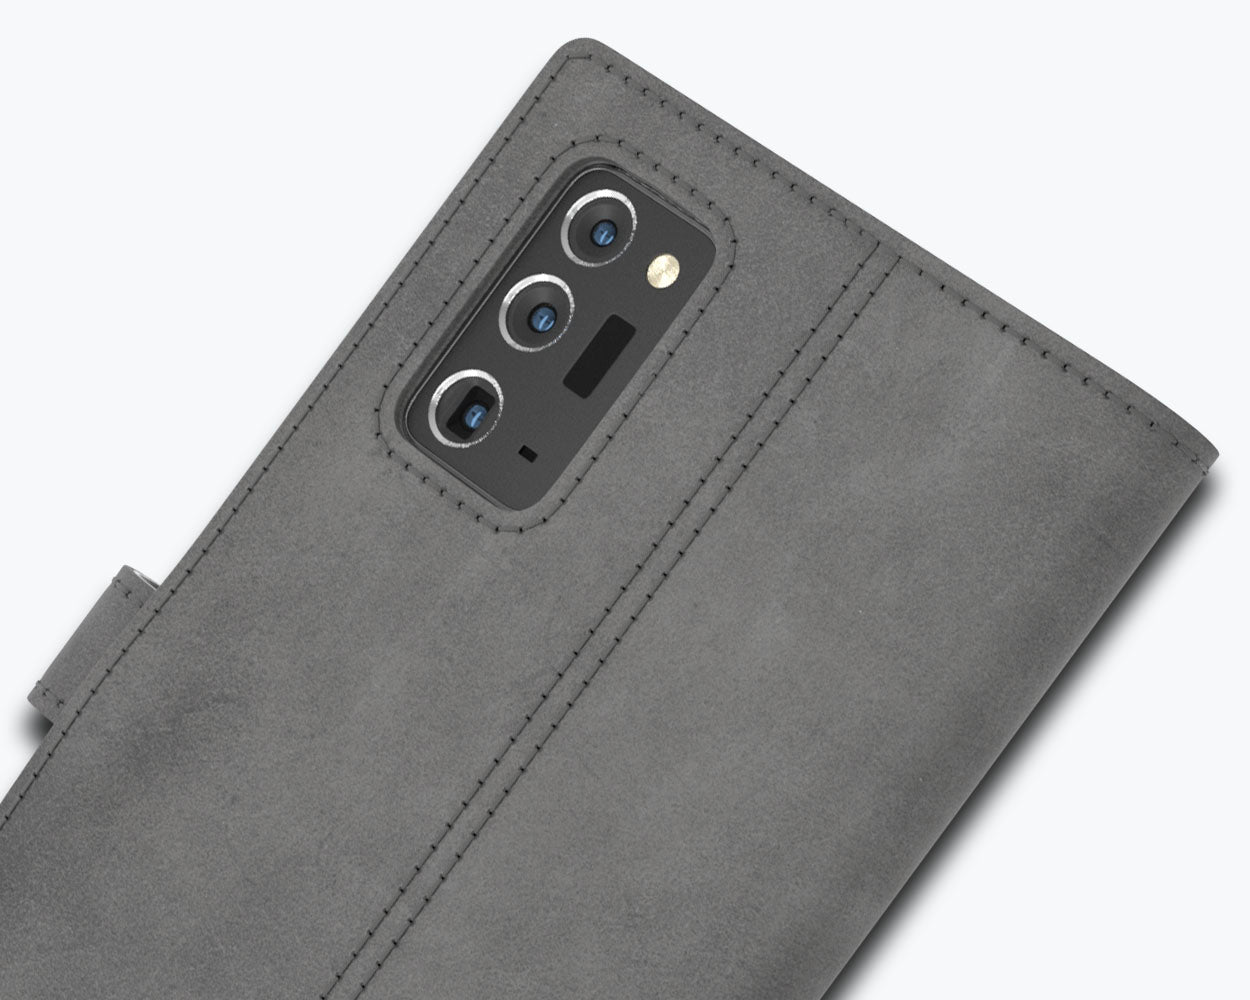 Samsung Galaxy Note 20 - Vintage Leather Wallet Grey Samsung Galaxy Note 20 - Snakehive UK